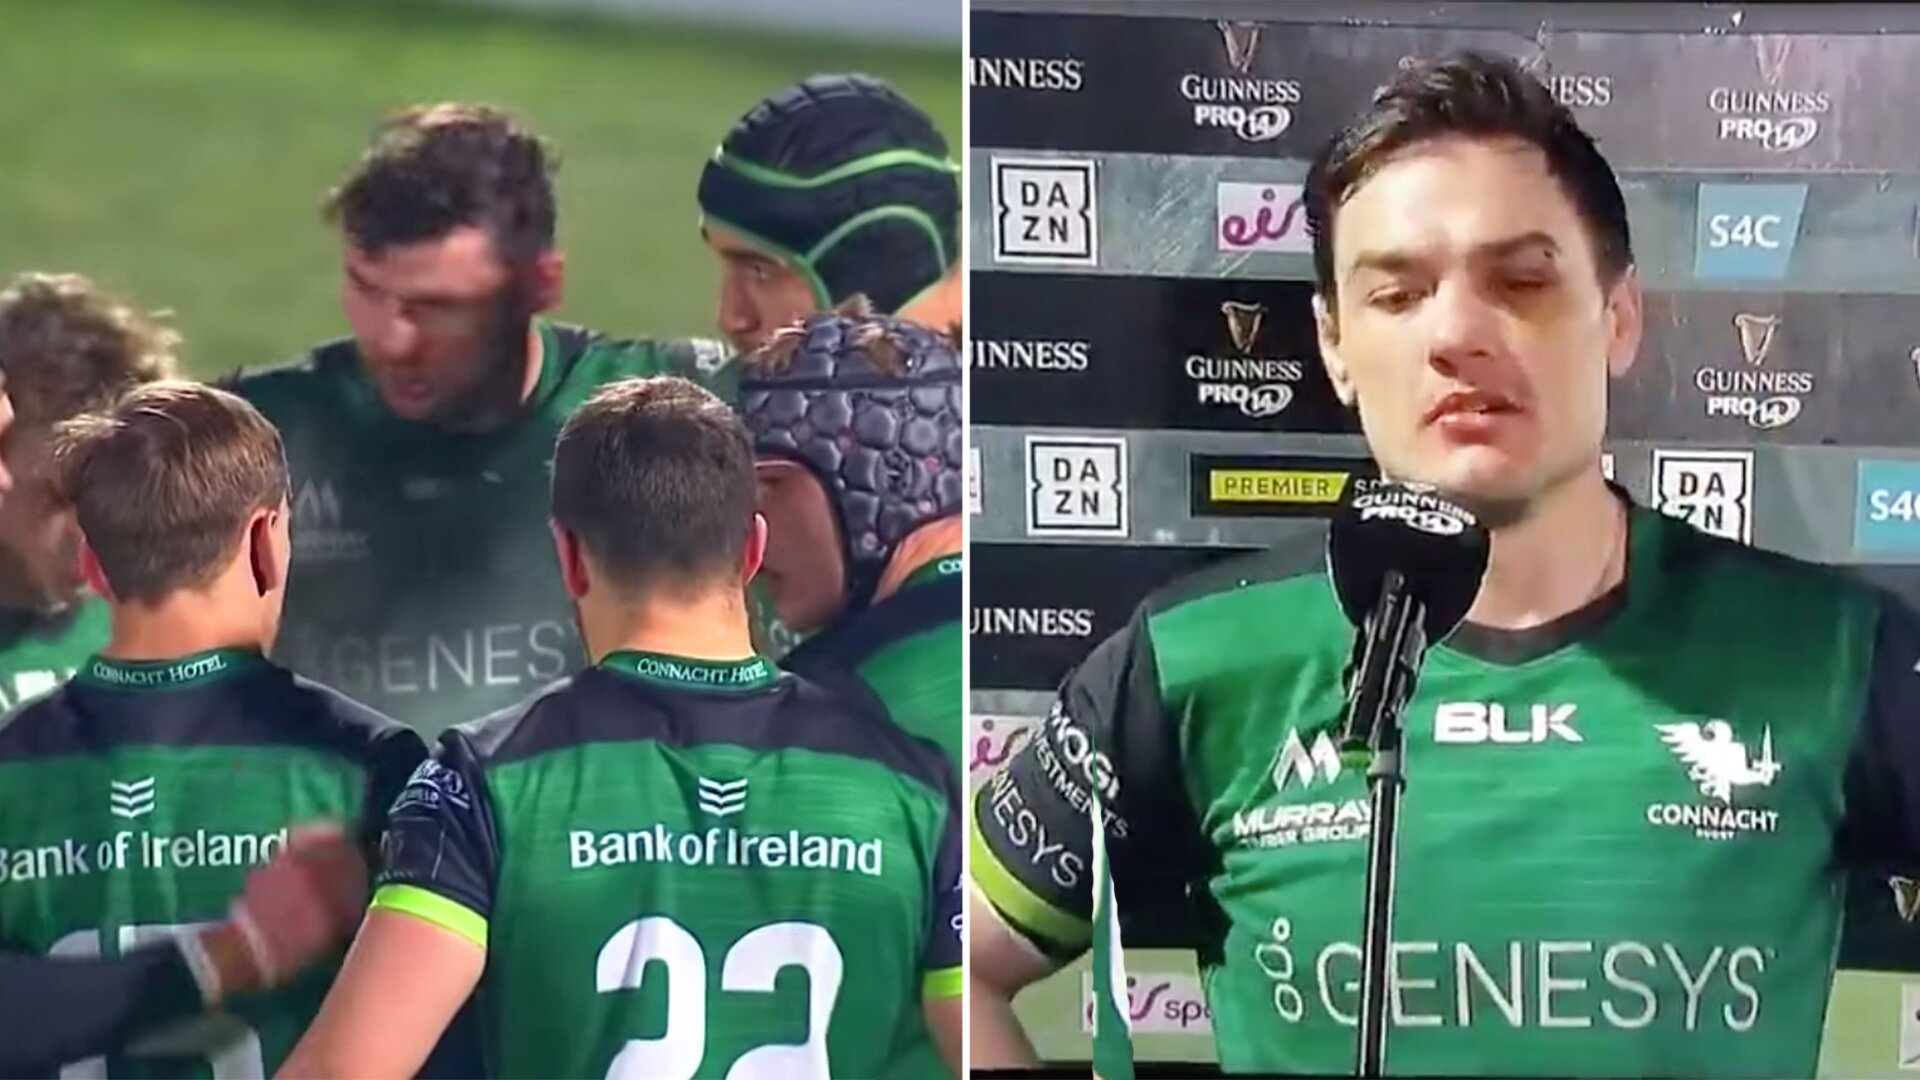 Connacht captain swears on live TV after they end  the Leinster incredible unbeaten run